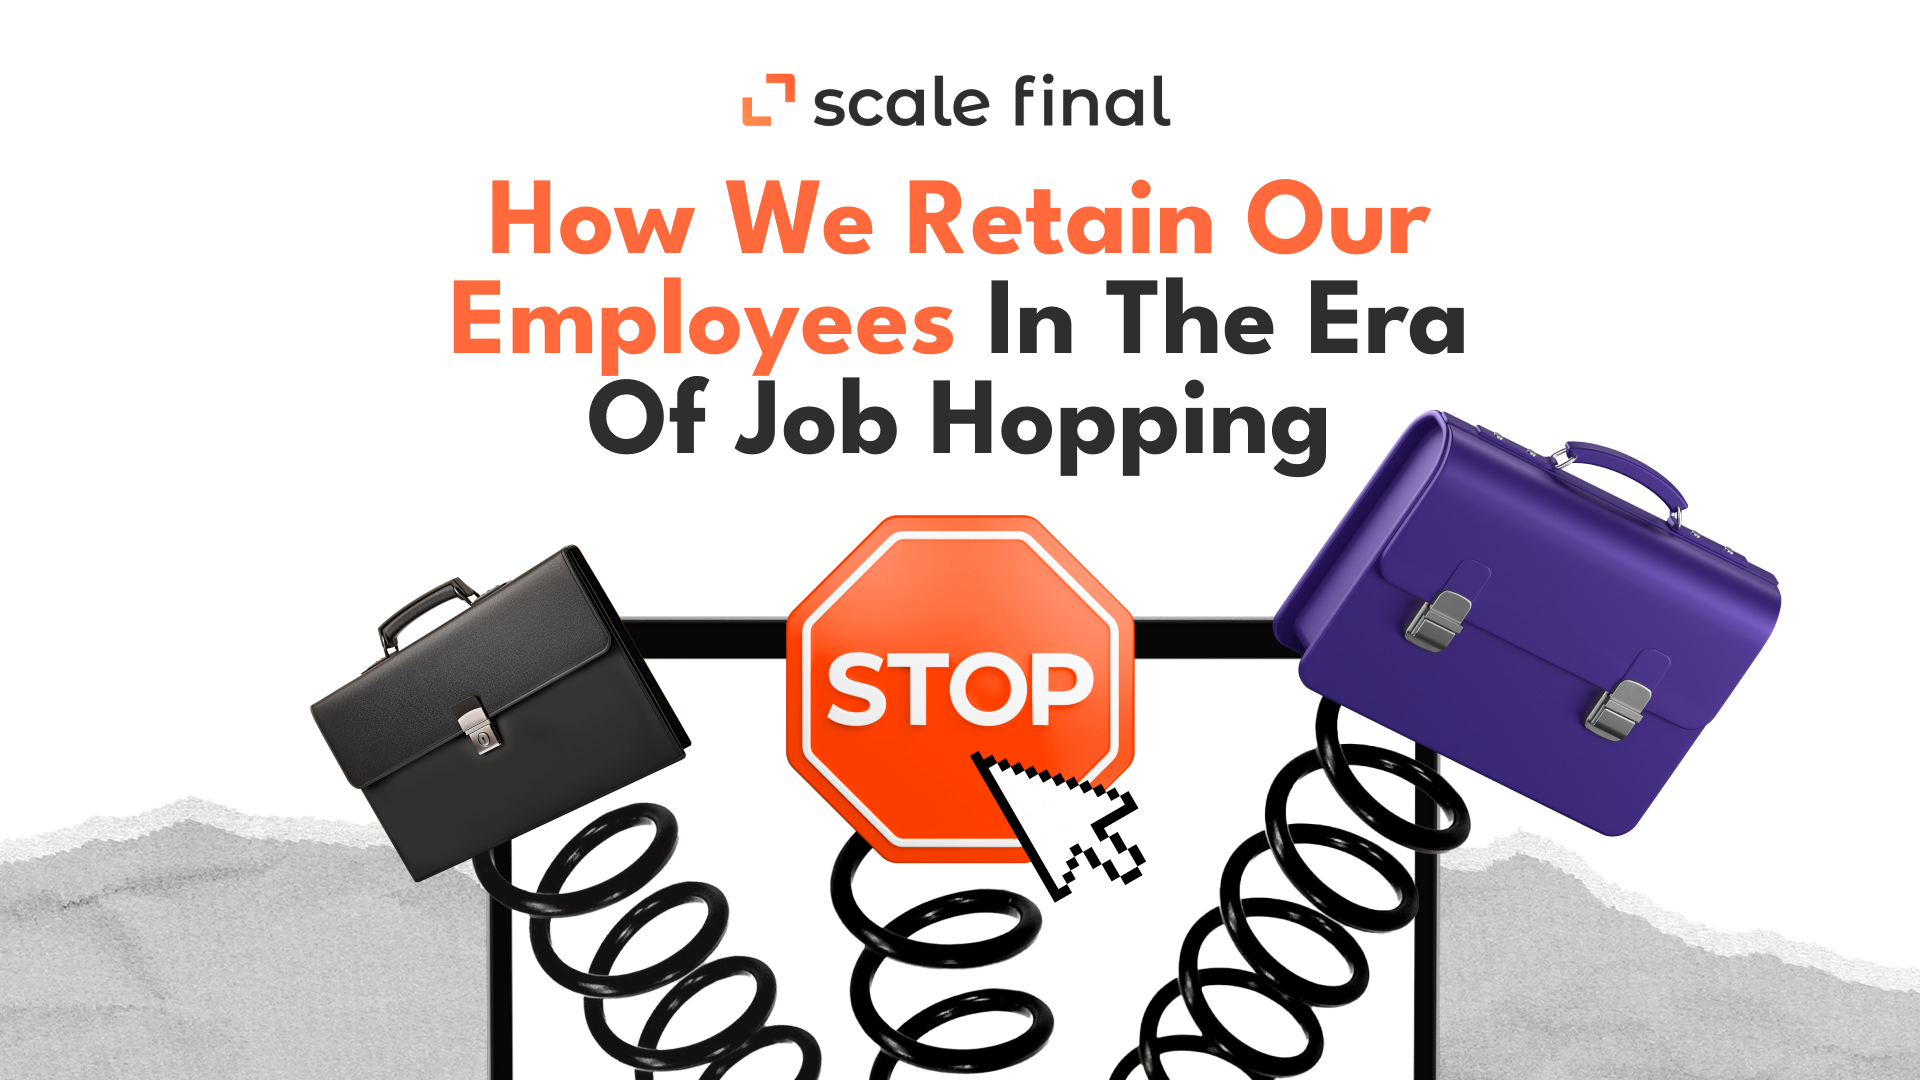 How we retain our employees in the era of job hopping